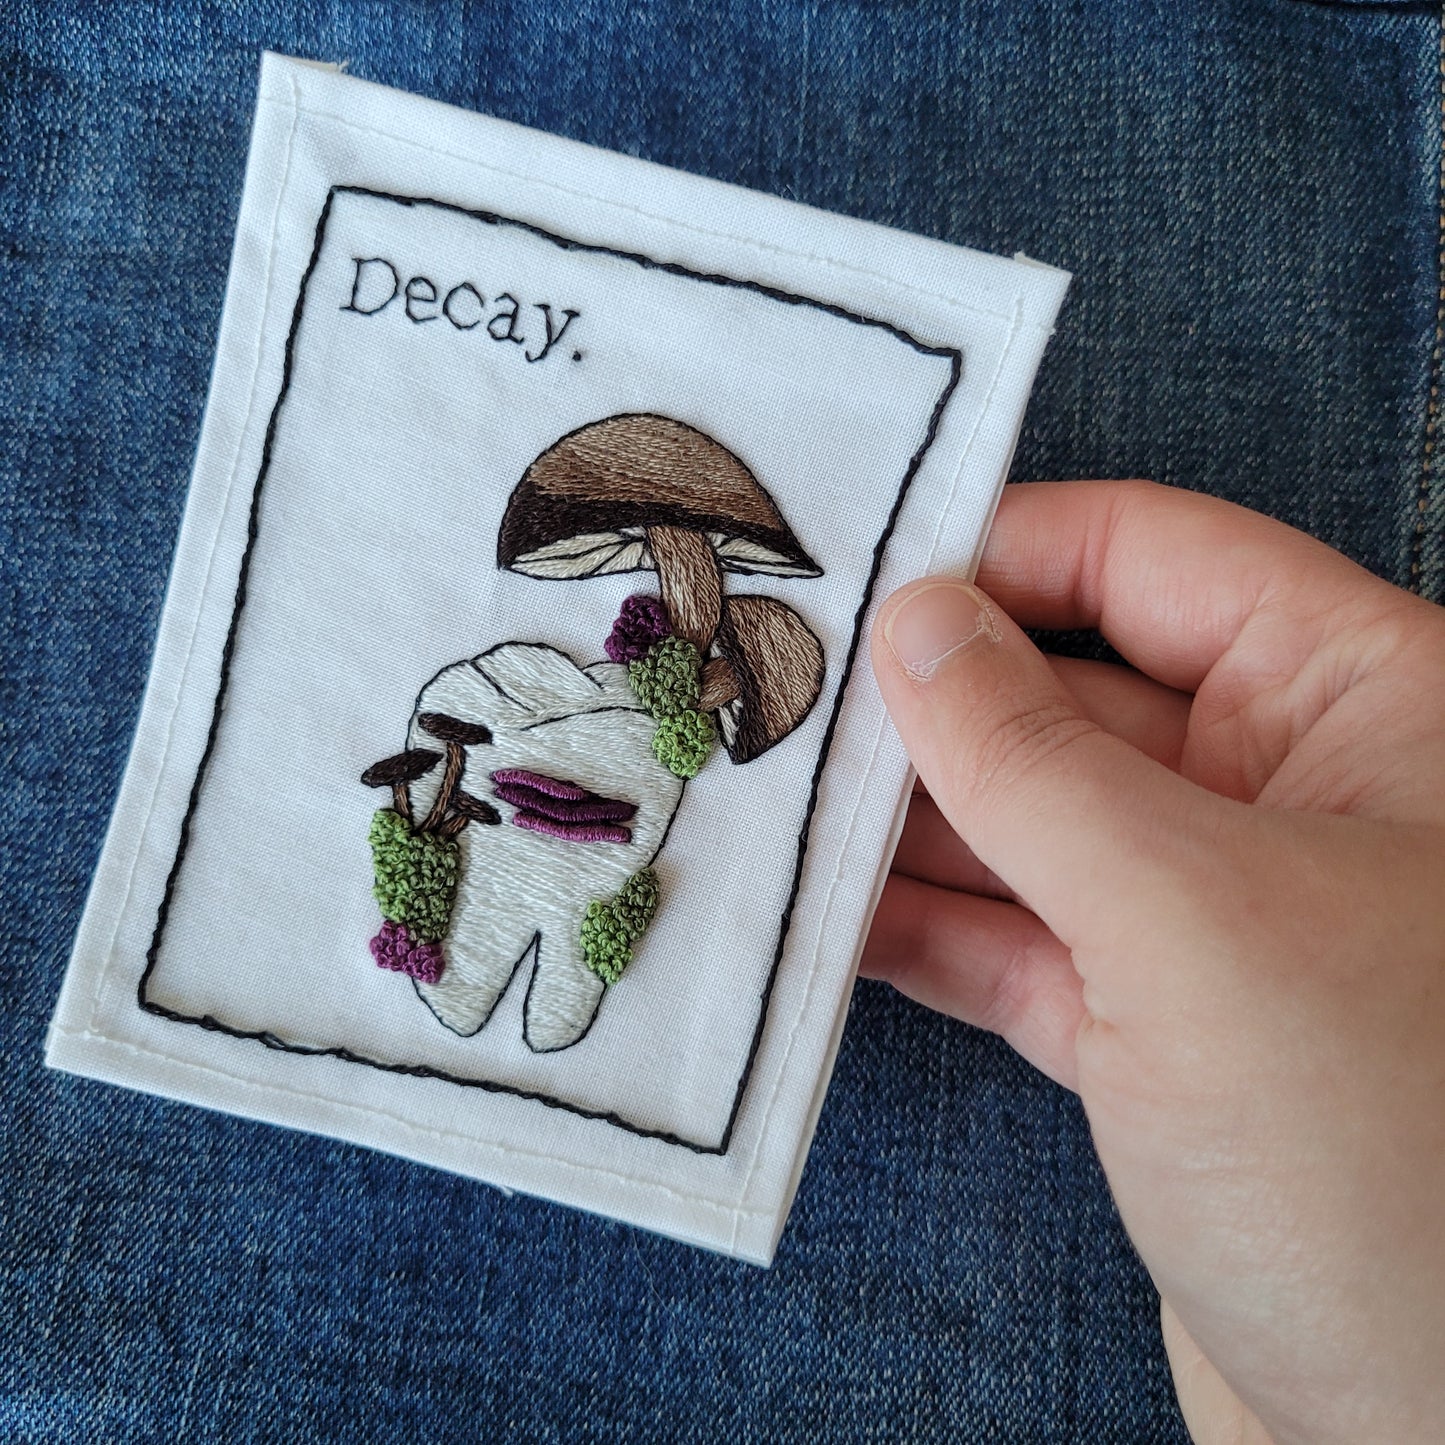 Decay | Hand Embroidered Iron-on Patch